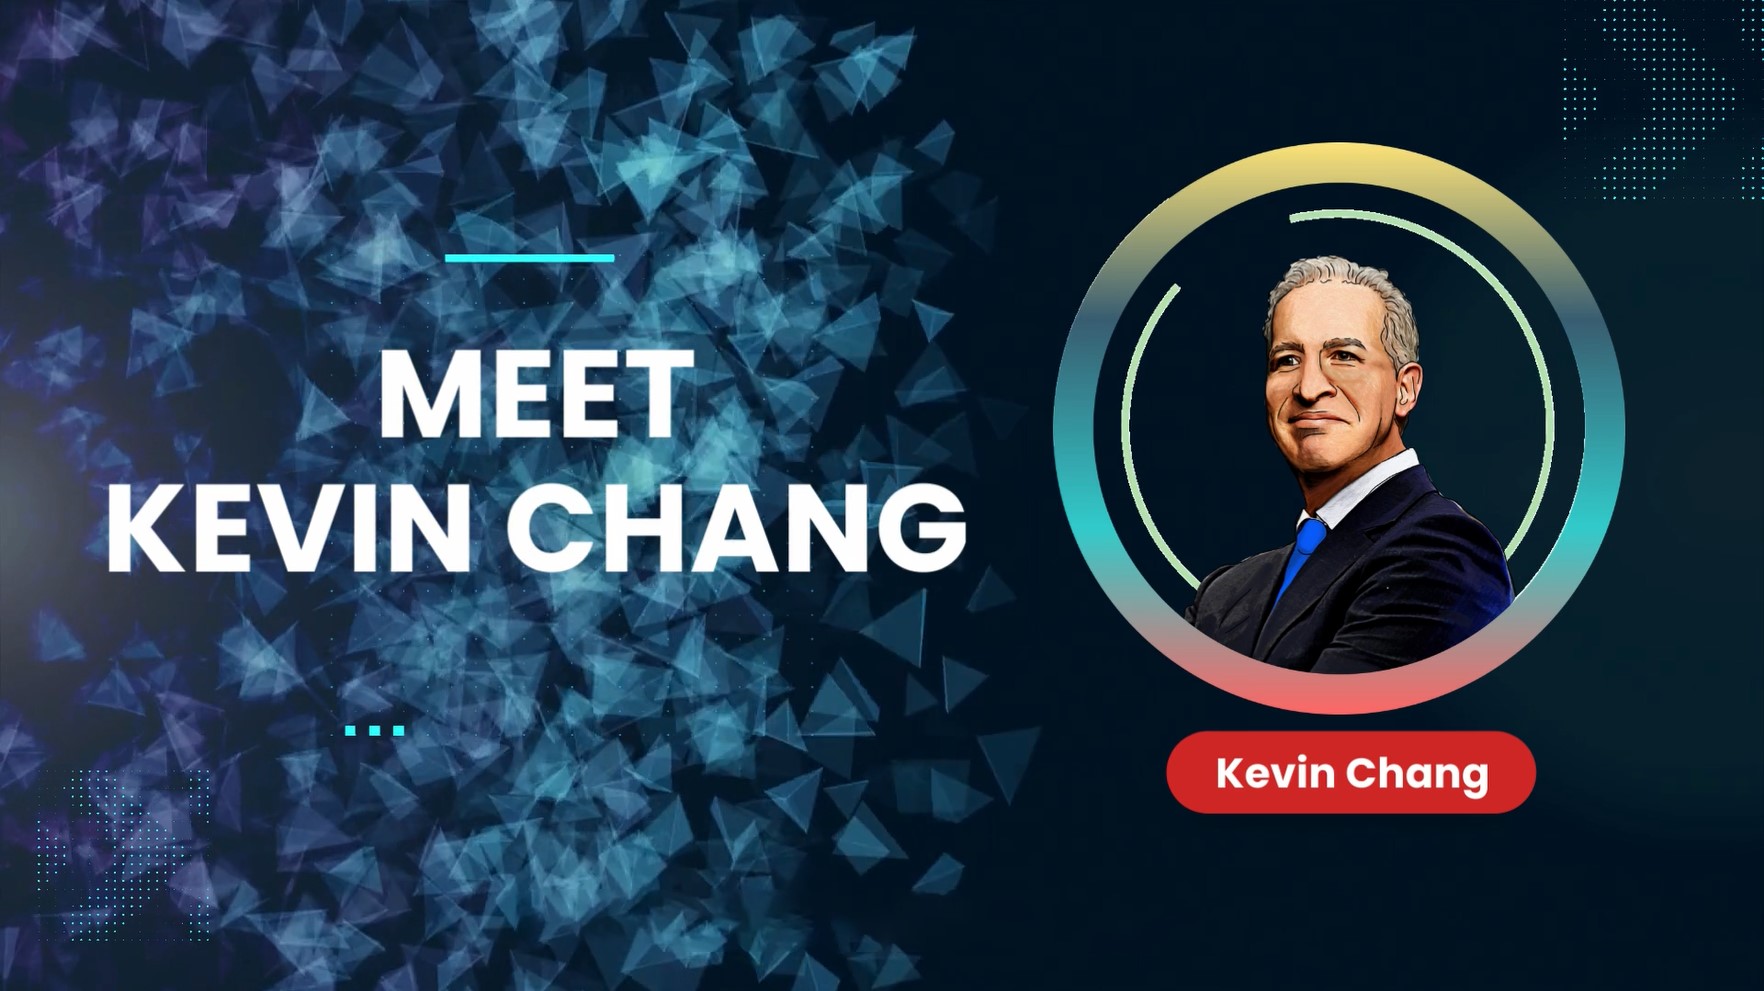 As a Chief Executive Officer like Kevin Chang